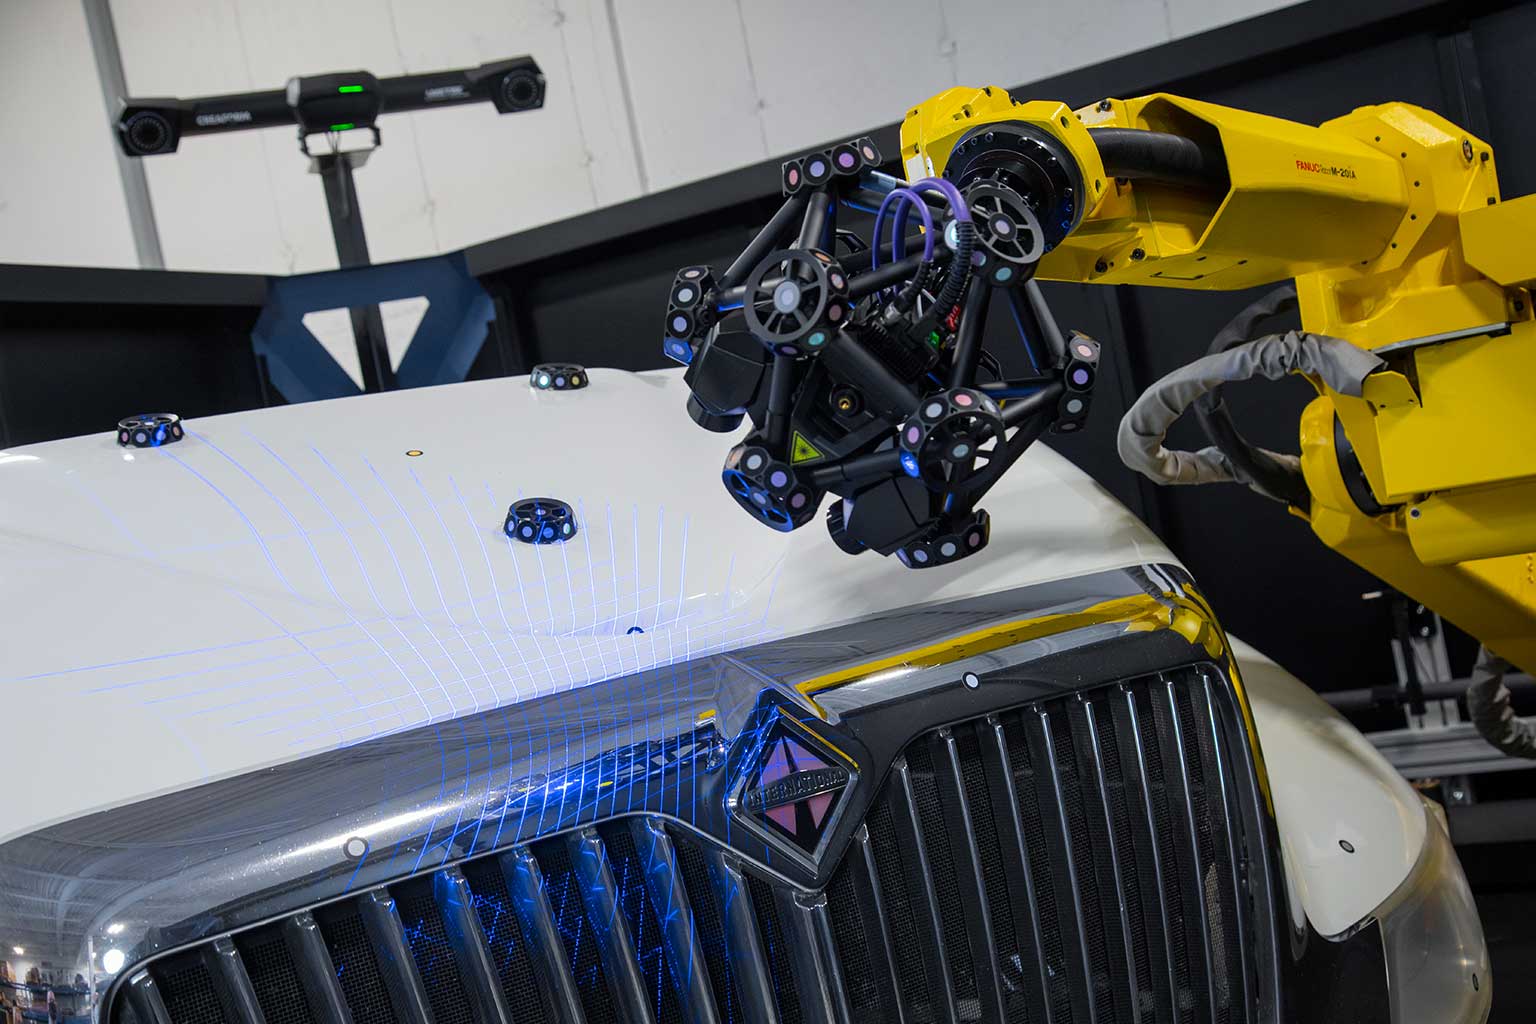 R-series robot mounted MetraSCAN 3D optical CMM scanning bumper and hood of white International truck with blue laser and C-track in background